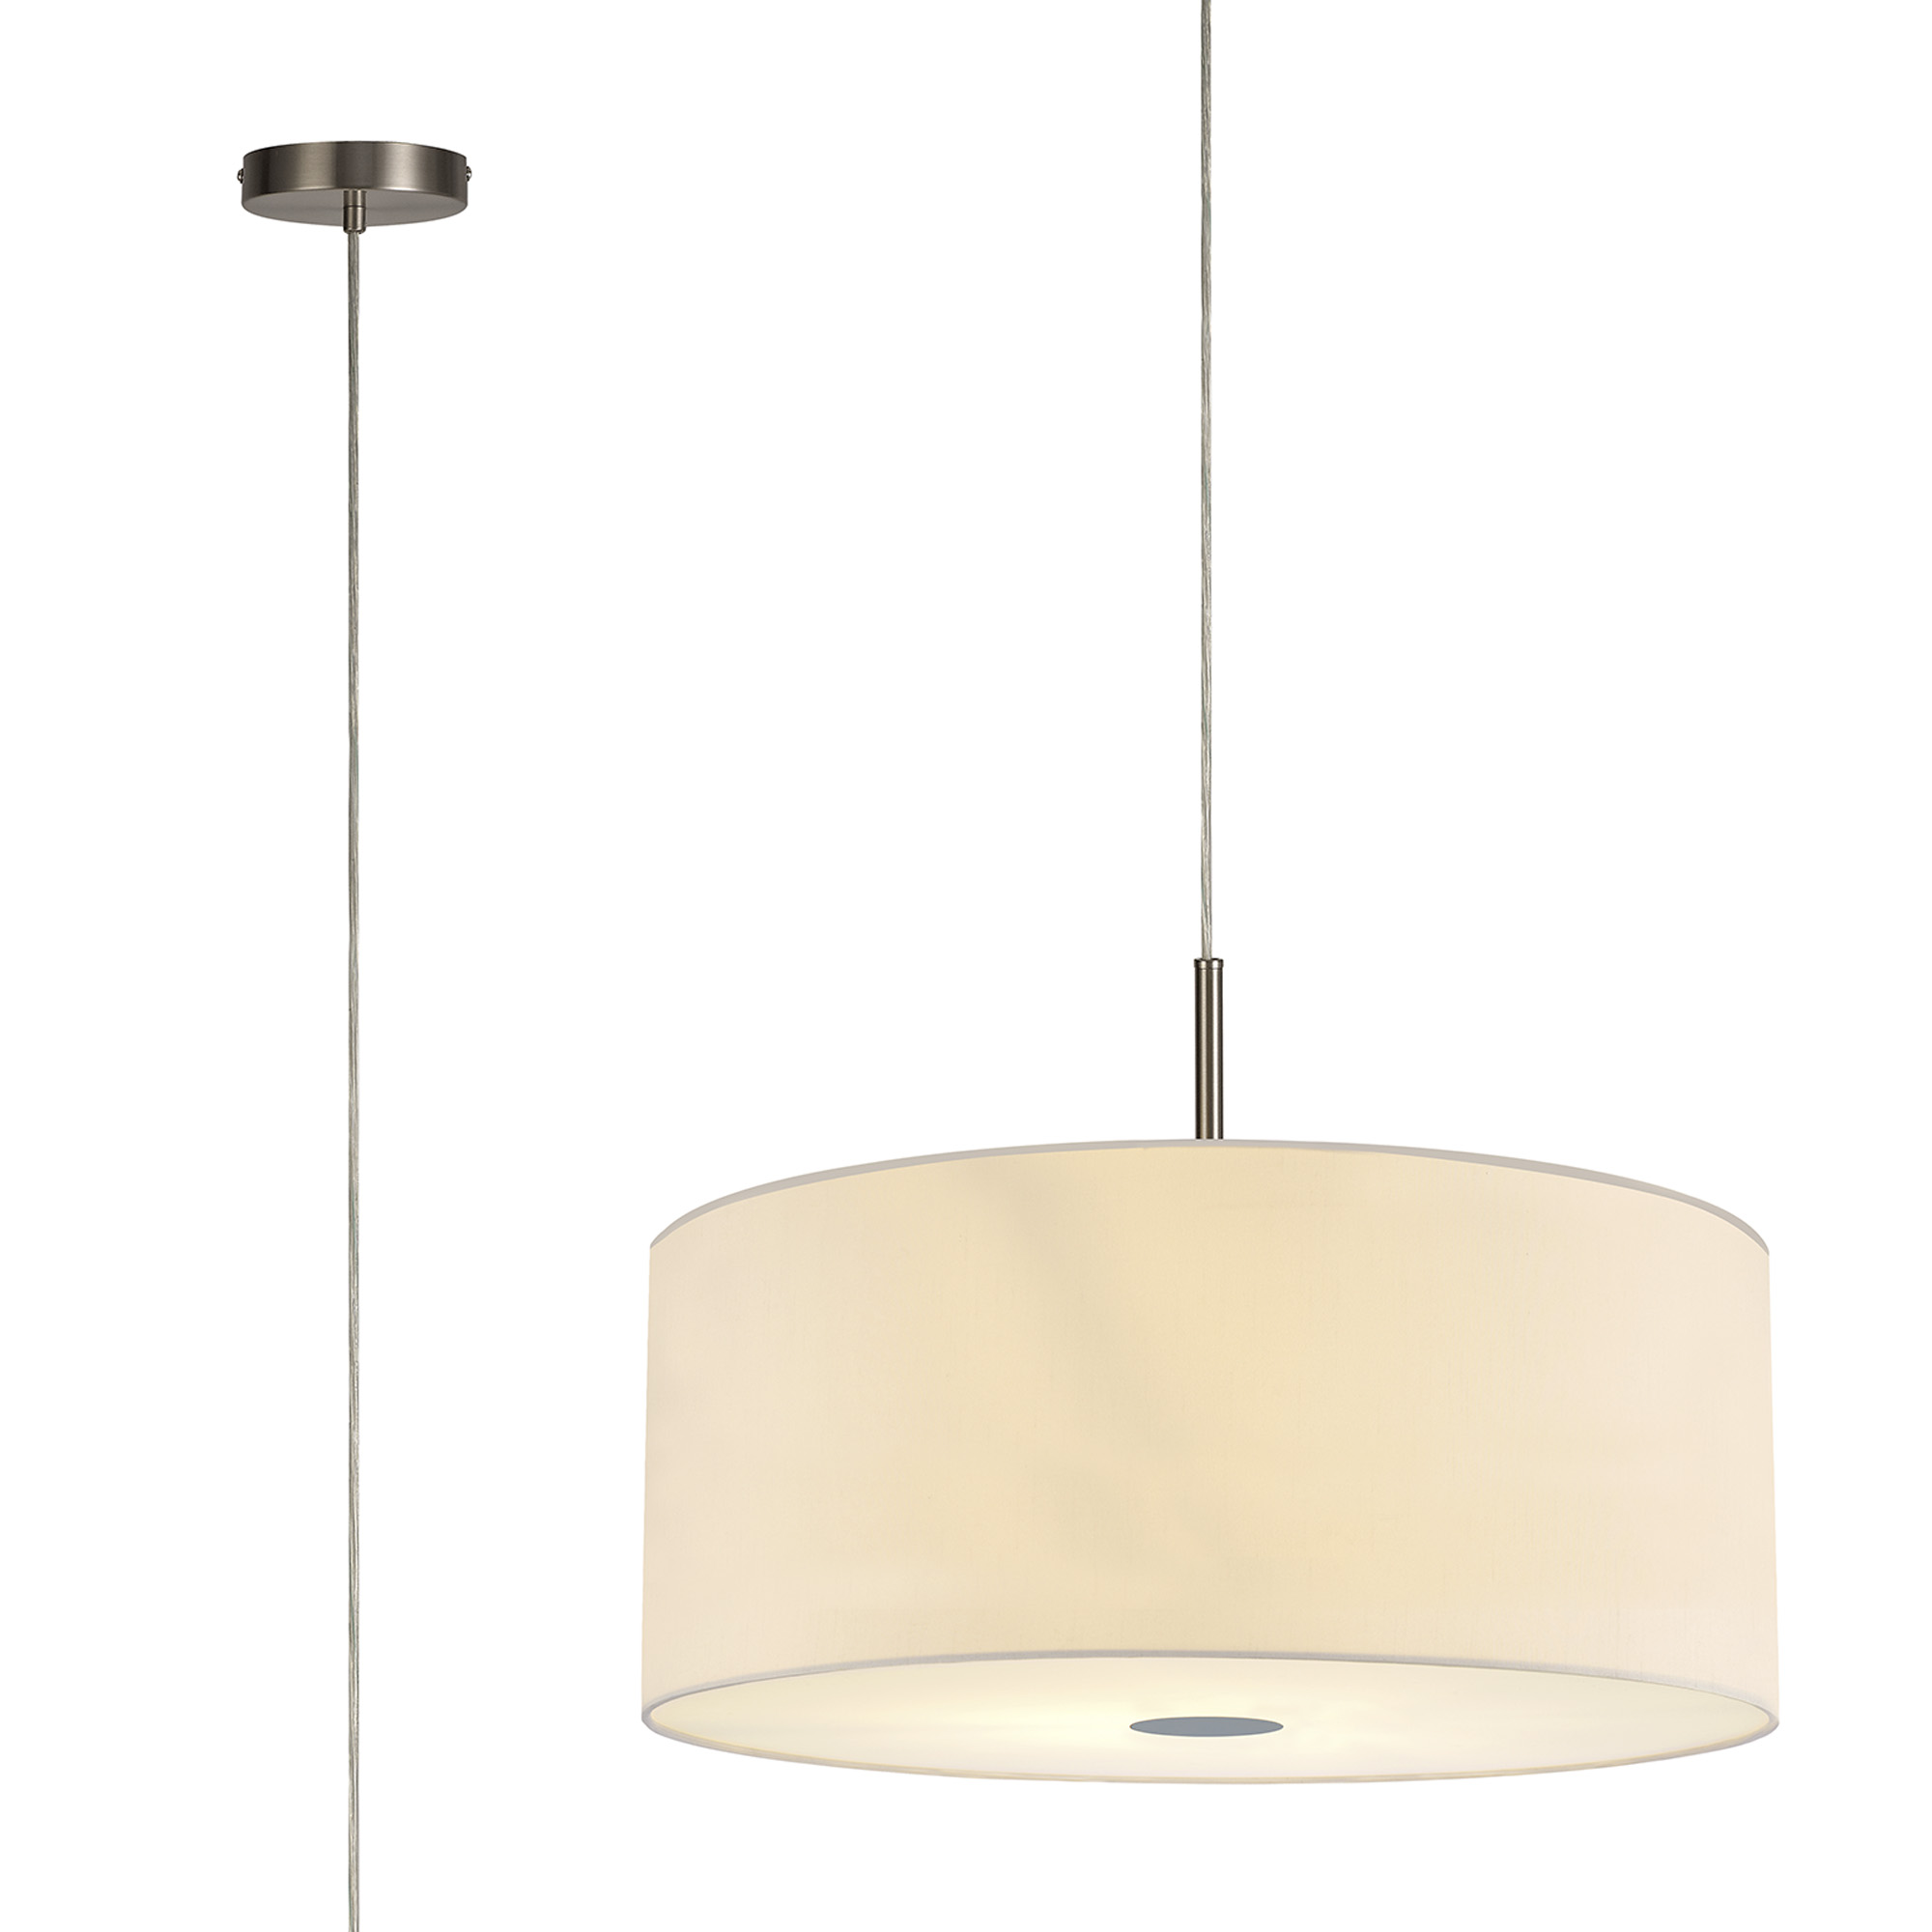 DK0545  Baymont 60cm 5 Light Pendant Satin Nickel, Ivory Pearl/White, Frosted Diffuser